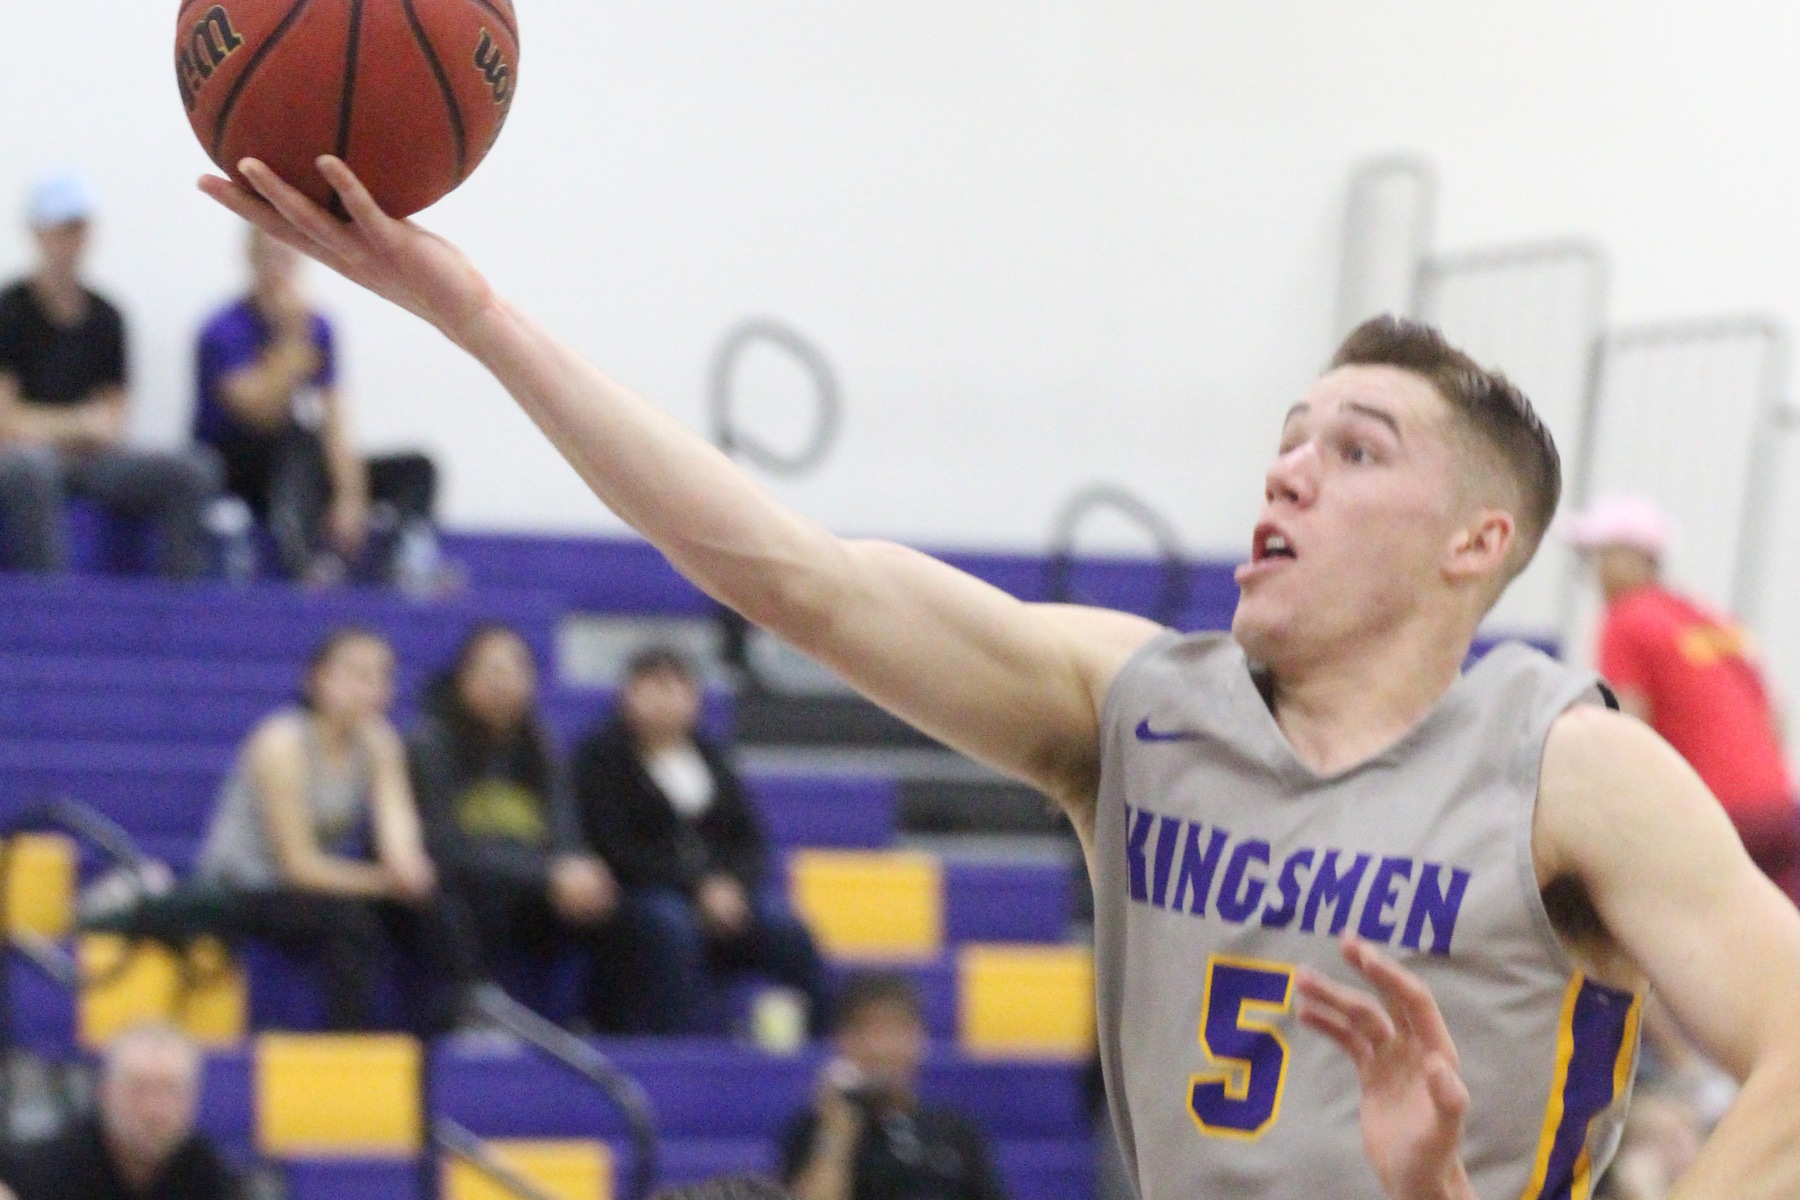 Kingsmen Roll Past Beavers with Hot Shooting Night; Ferreira Scores Career-High 32